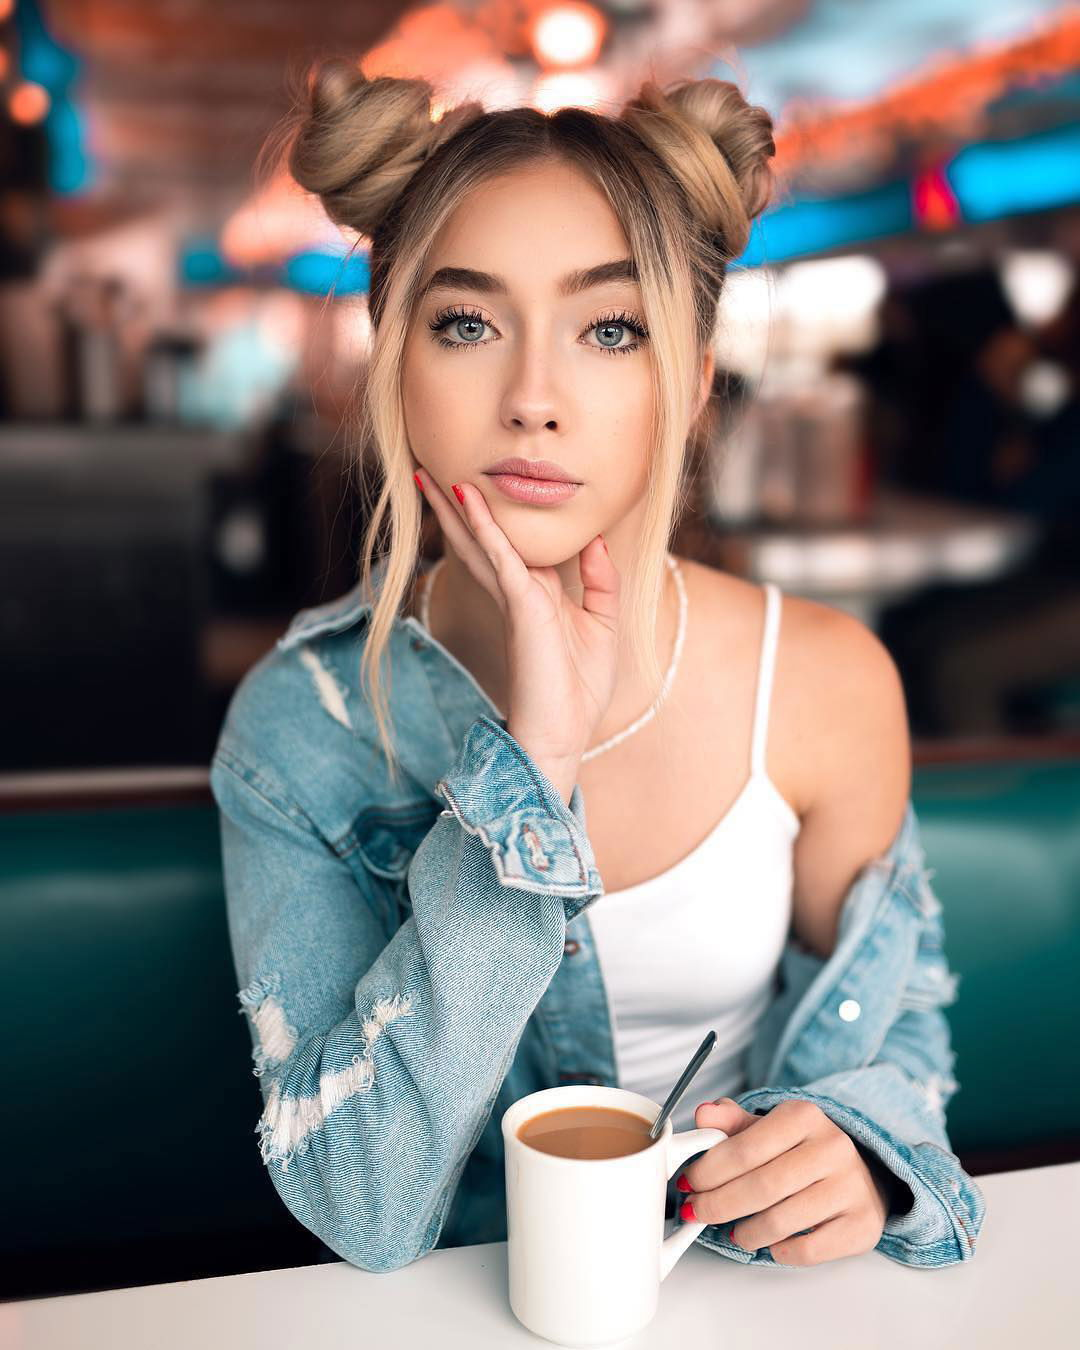 Photo by Devynsdogg with the username @Devynsdogg,  March 10, 2019 at 6:08 PM and the text says 'I could just gaze into those eyes while the coffee gets cold. #blondesarebeautiful #sexyfemales
/?utm_source=ig_web_copy_link'